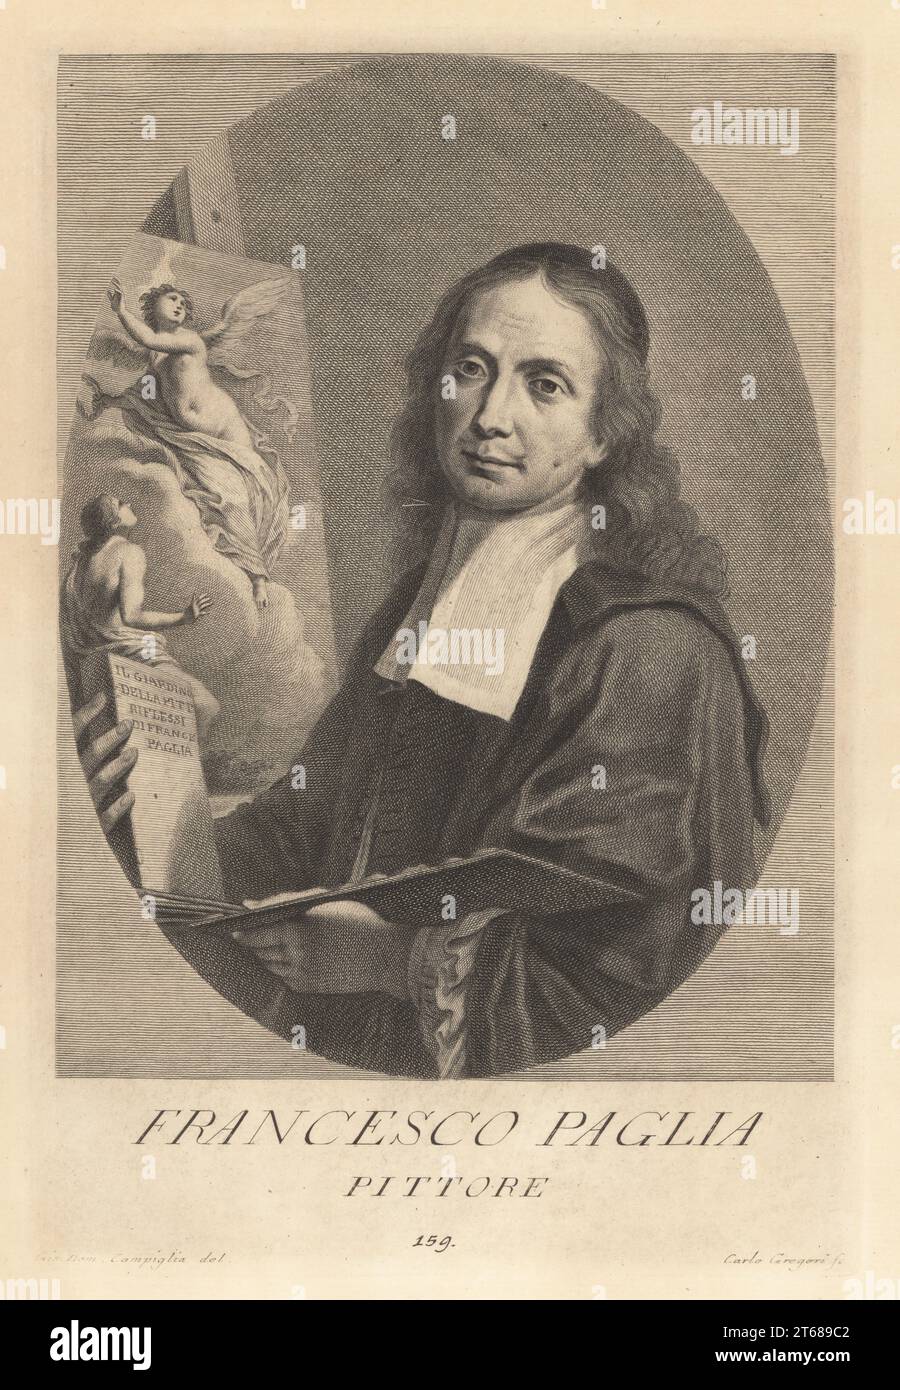 Francesco Paglia, Italian painter of the late-Baroque period, 1636-1713. Worked mainly in his birthplace of Brescia. With book Il Giardino della Pitt. Riflessi di France Paglia, palette and paint brush before a painting on an easel. Pittore. Copperplate engraving by Carlo Gregori after Giovanni Domenico Campiglia after a self portrait by the artist from Francesco Moucke's Museo Florentino (Museum Florentinum), Serie di Ritratti de Pittori (Series of Portraits of Painters) stamperia Mouckiana, Florence, 1752-62. Stock Photo